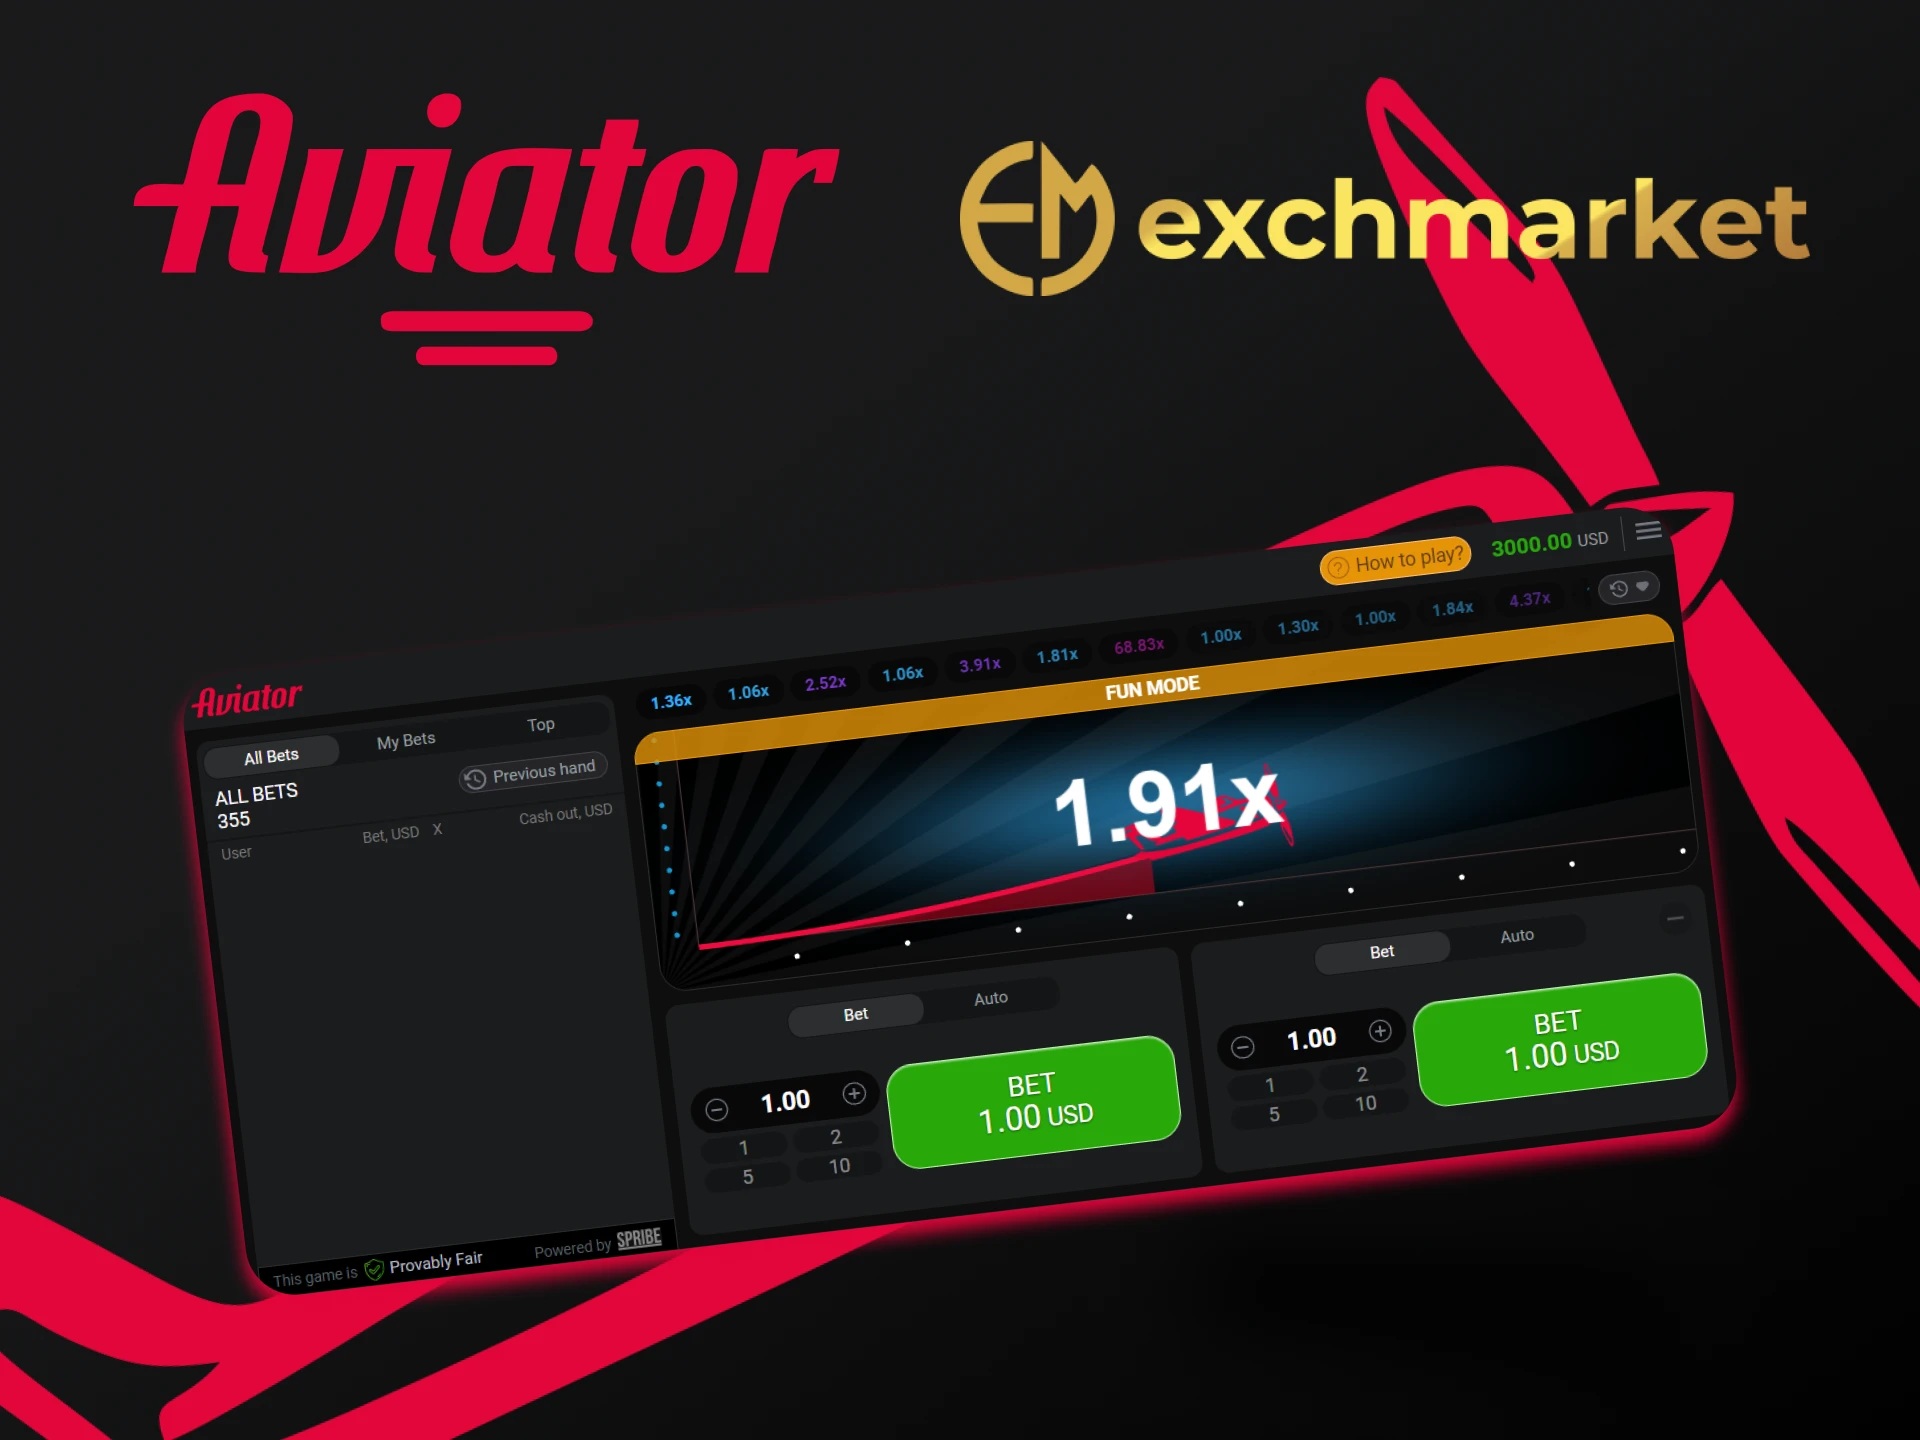 Learn all about Aviator at Exchmarket.